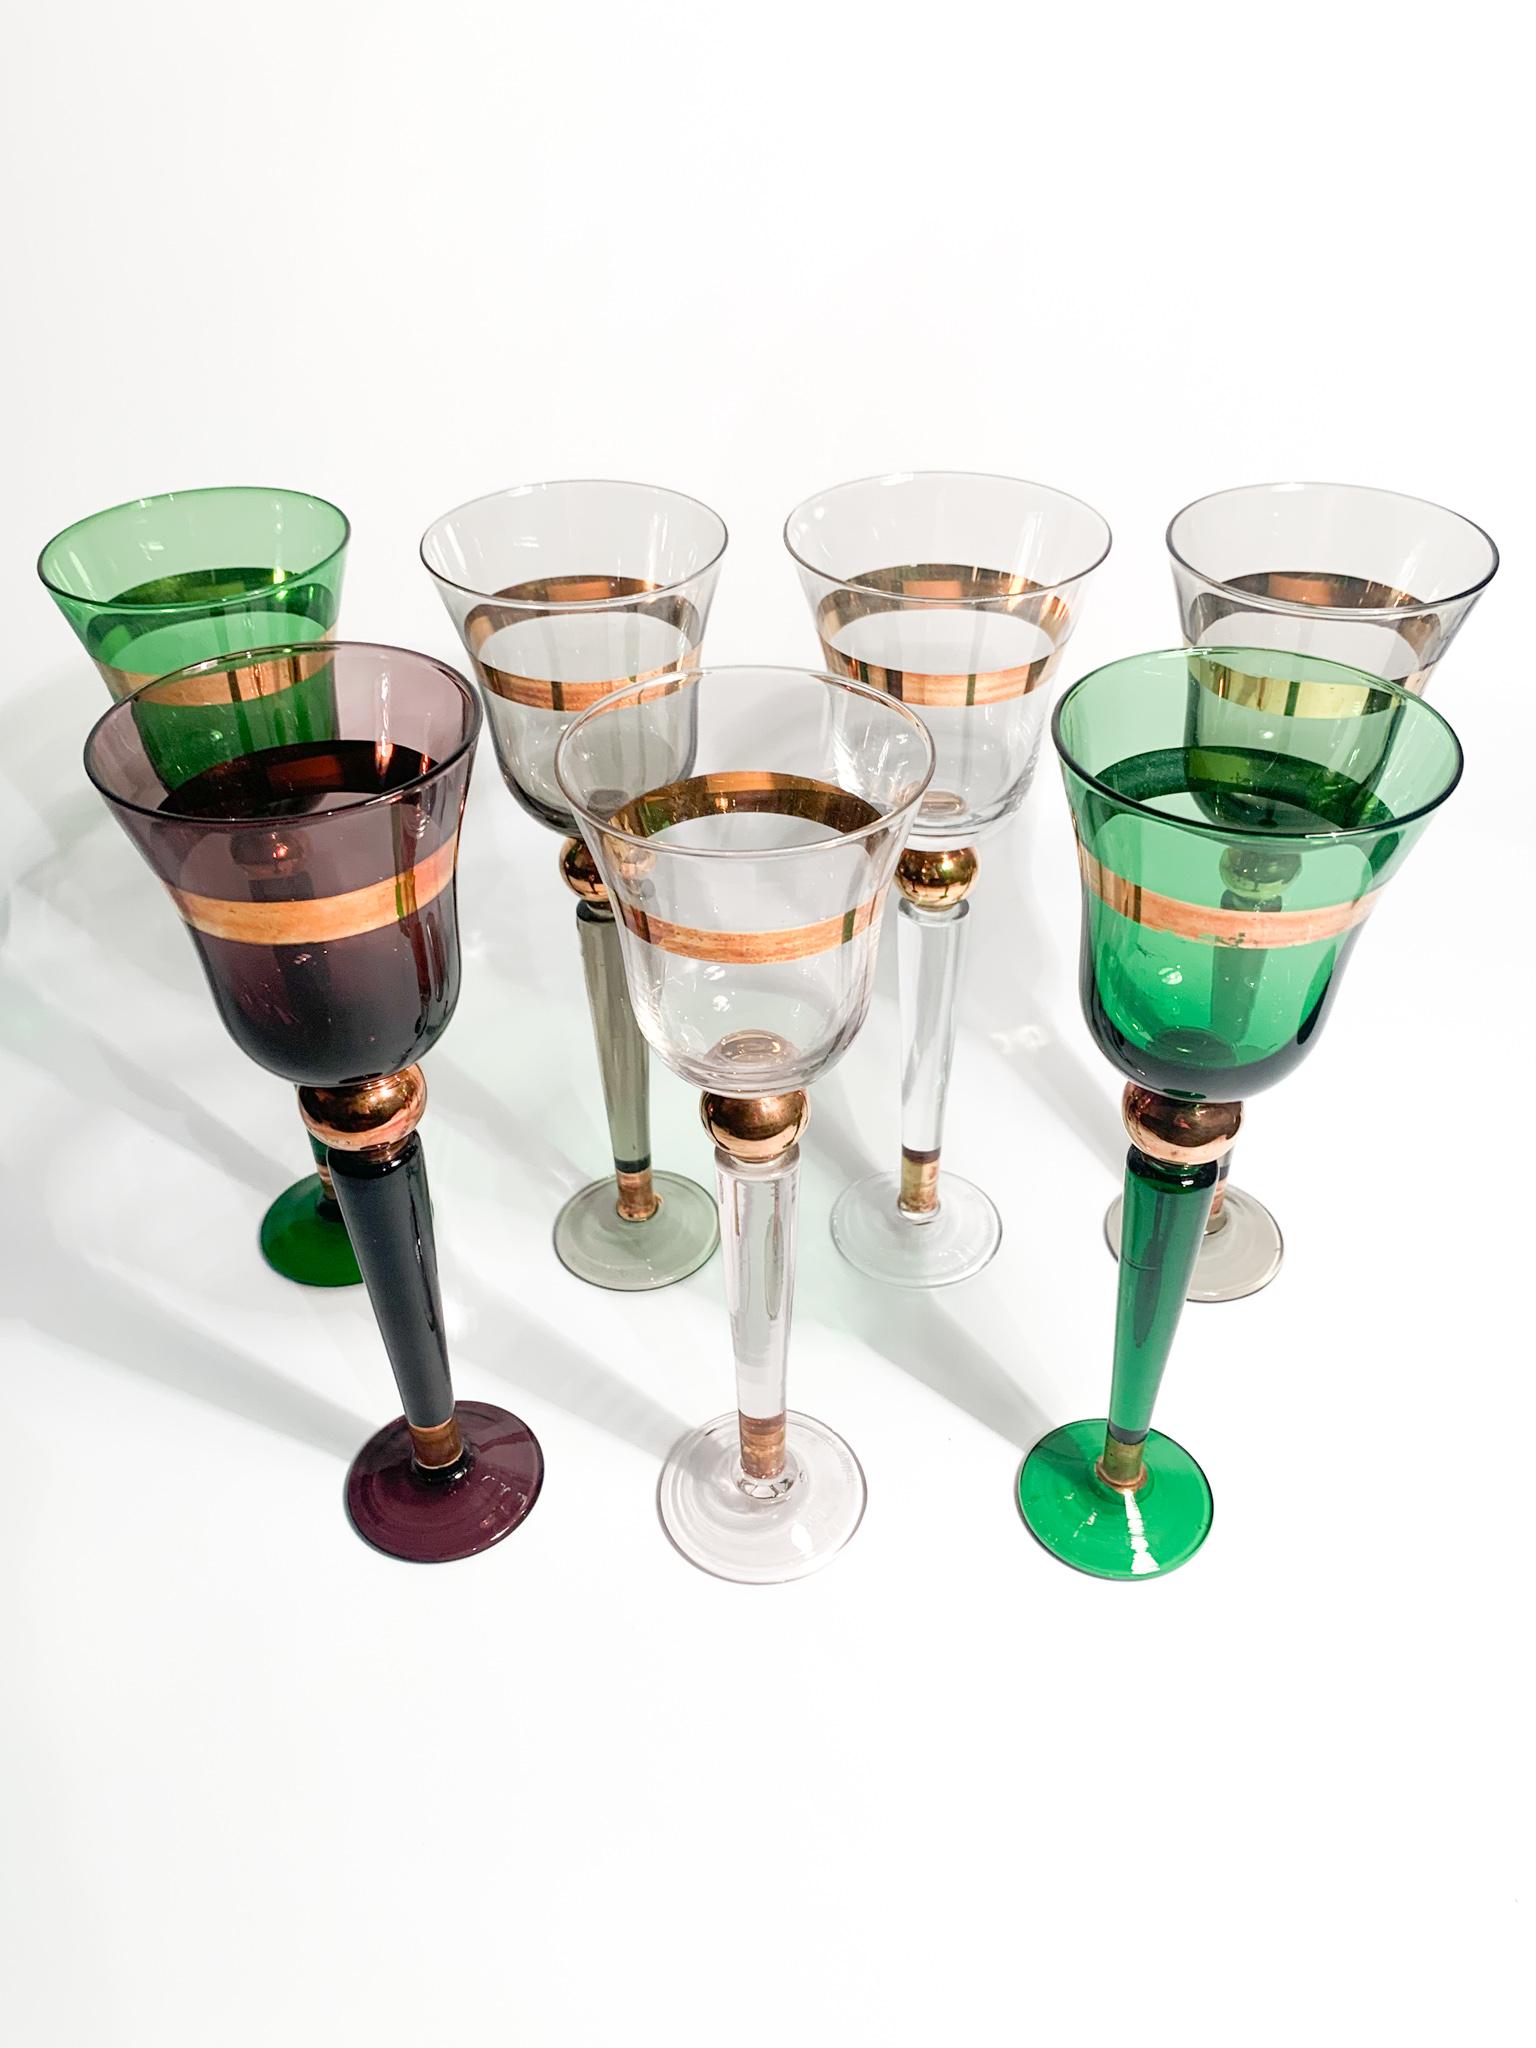 Set of 6 Venini Multicolored Murano Glass Goblets from the 1950s For Sale 1